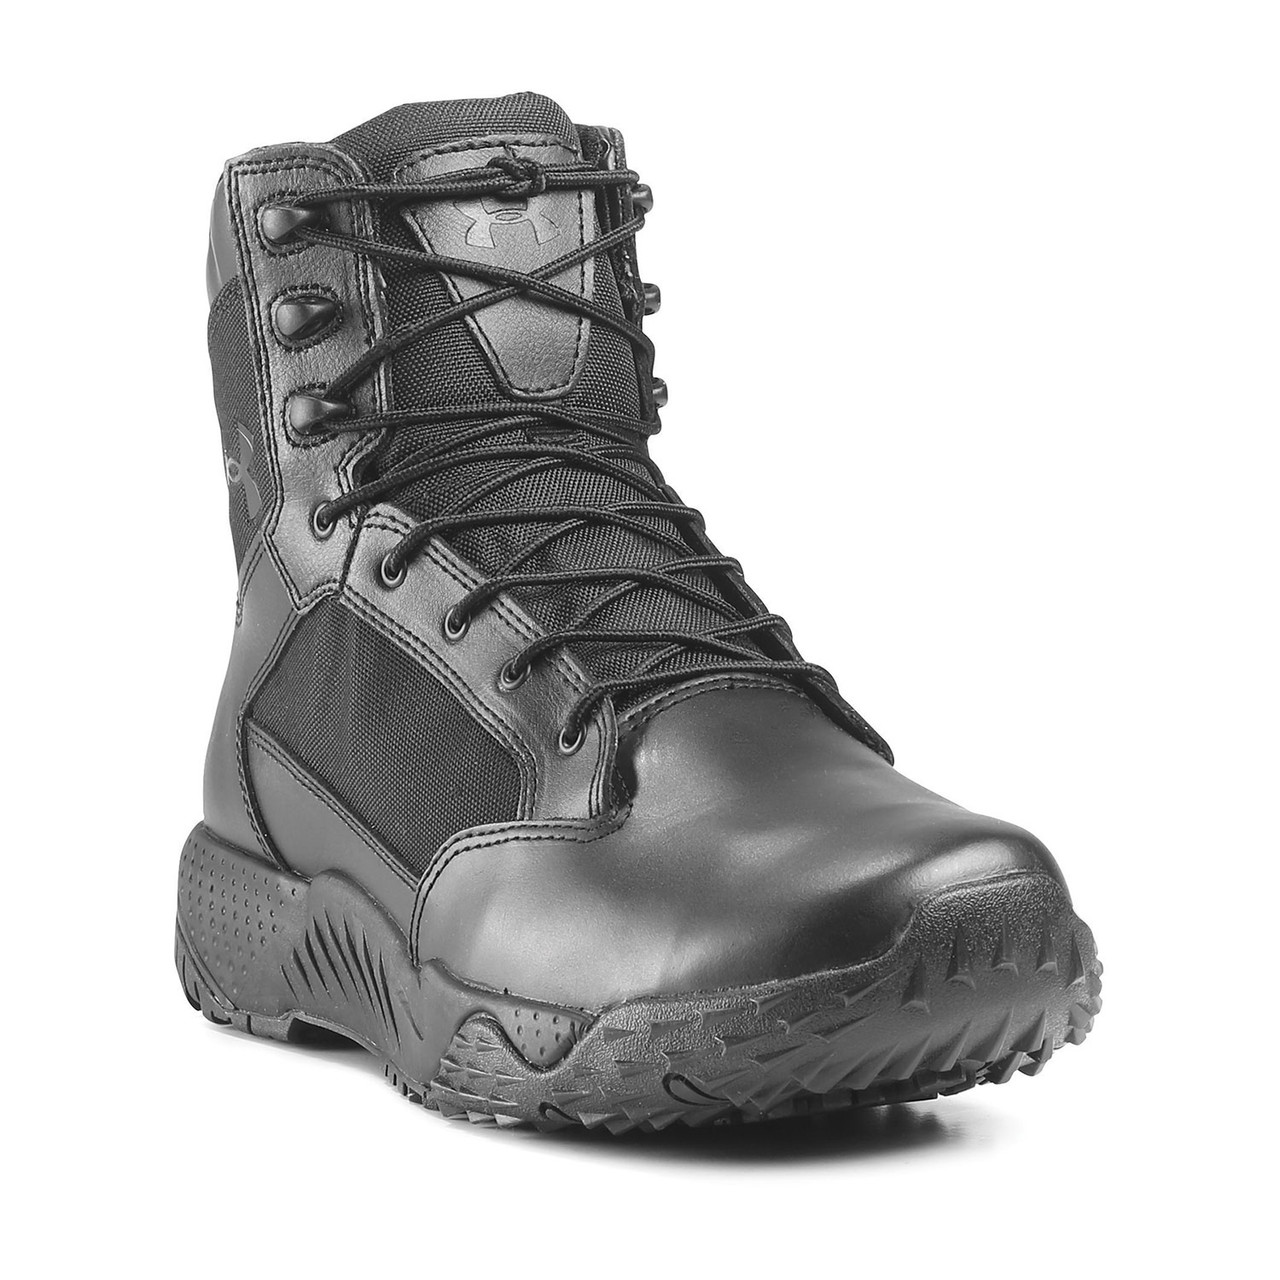 Under Armour Stellar Tactical Boots - Review 